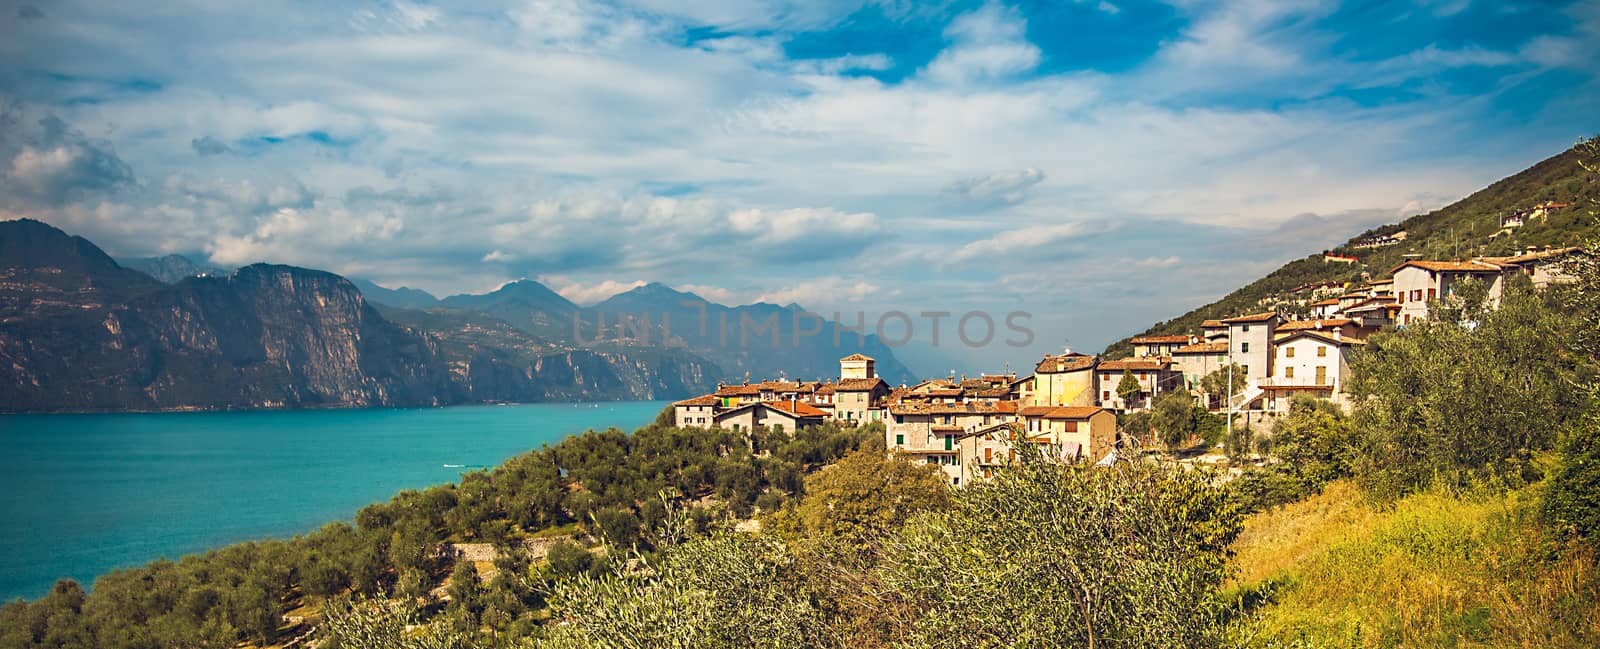 View of Lake Garda in Italy by Makeral